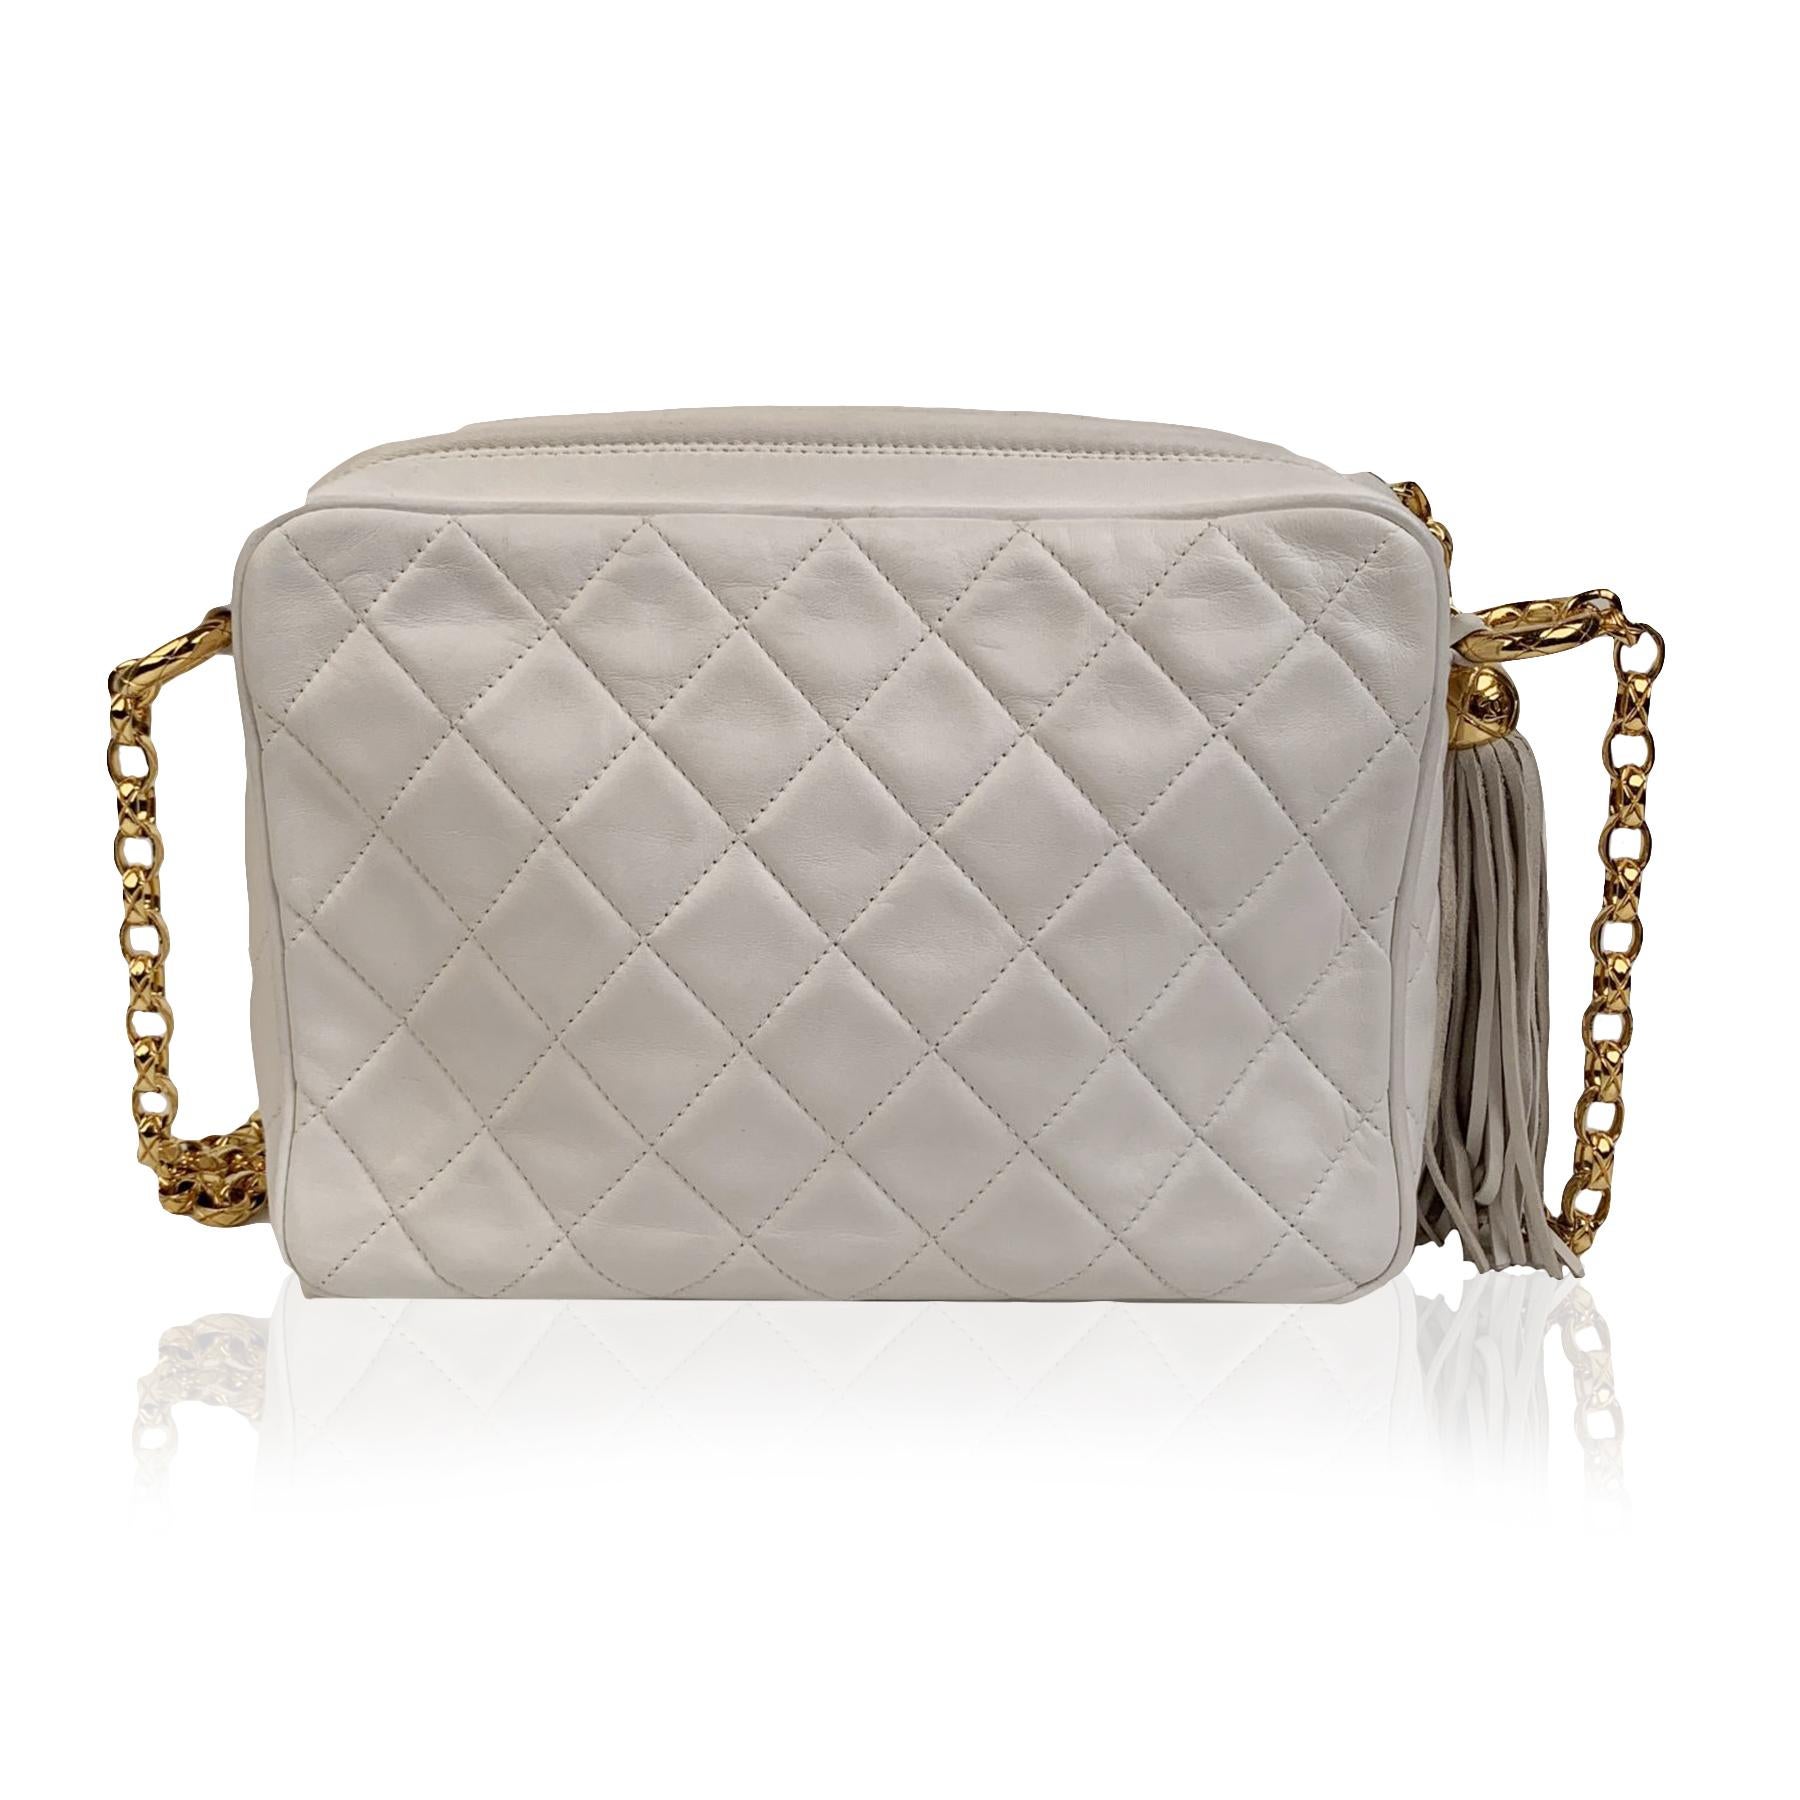 Chanel Vintage White Quilted Leather CC Stitch Camera Bag 2